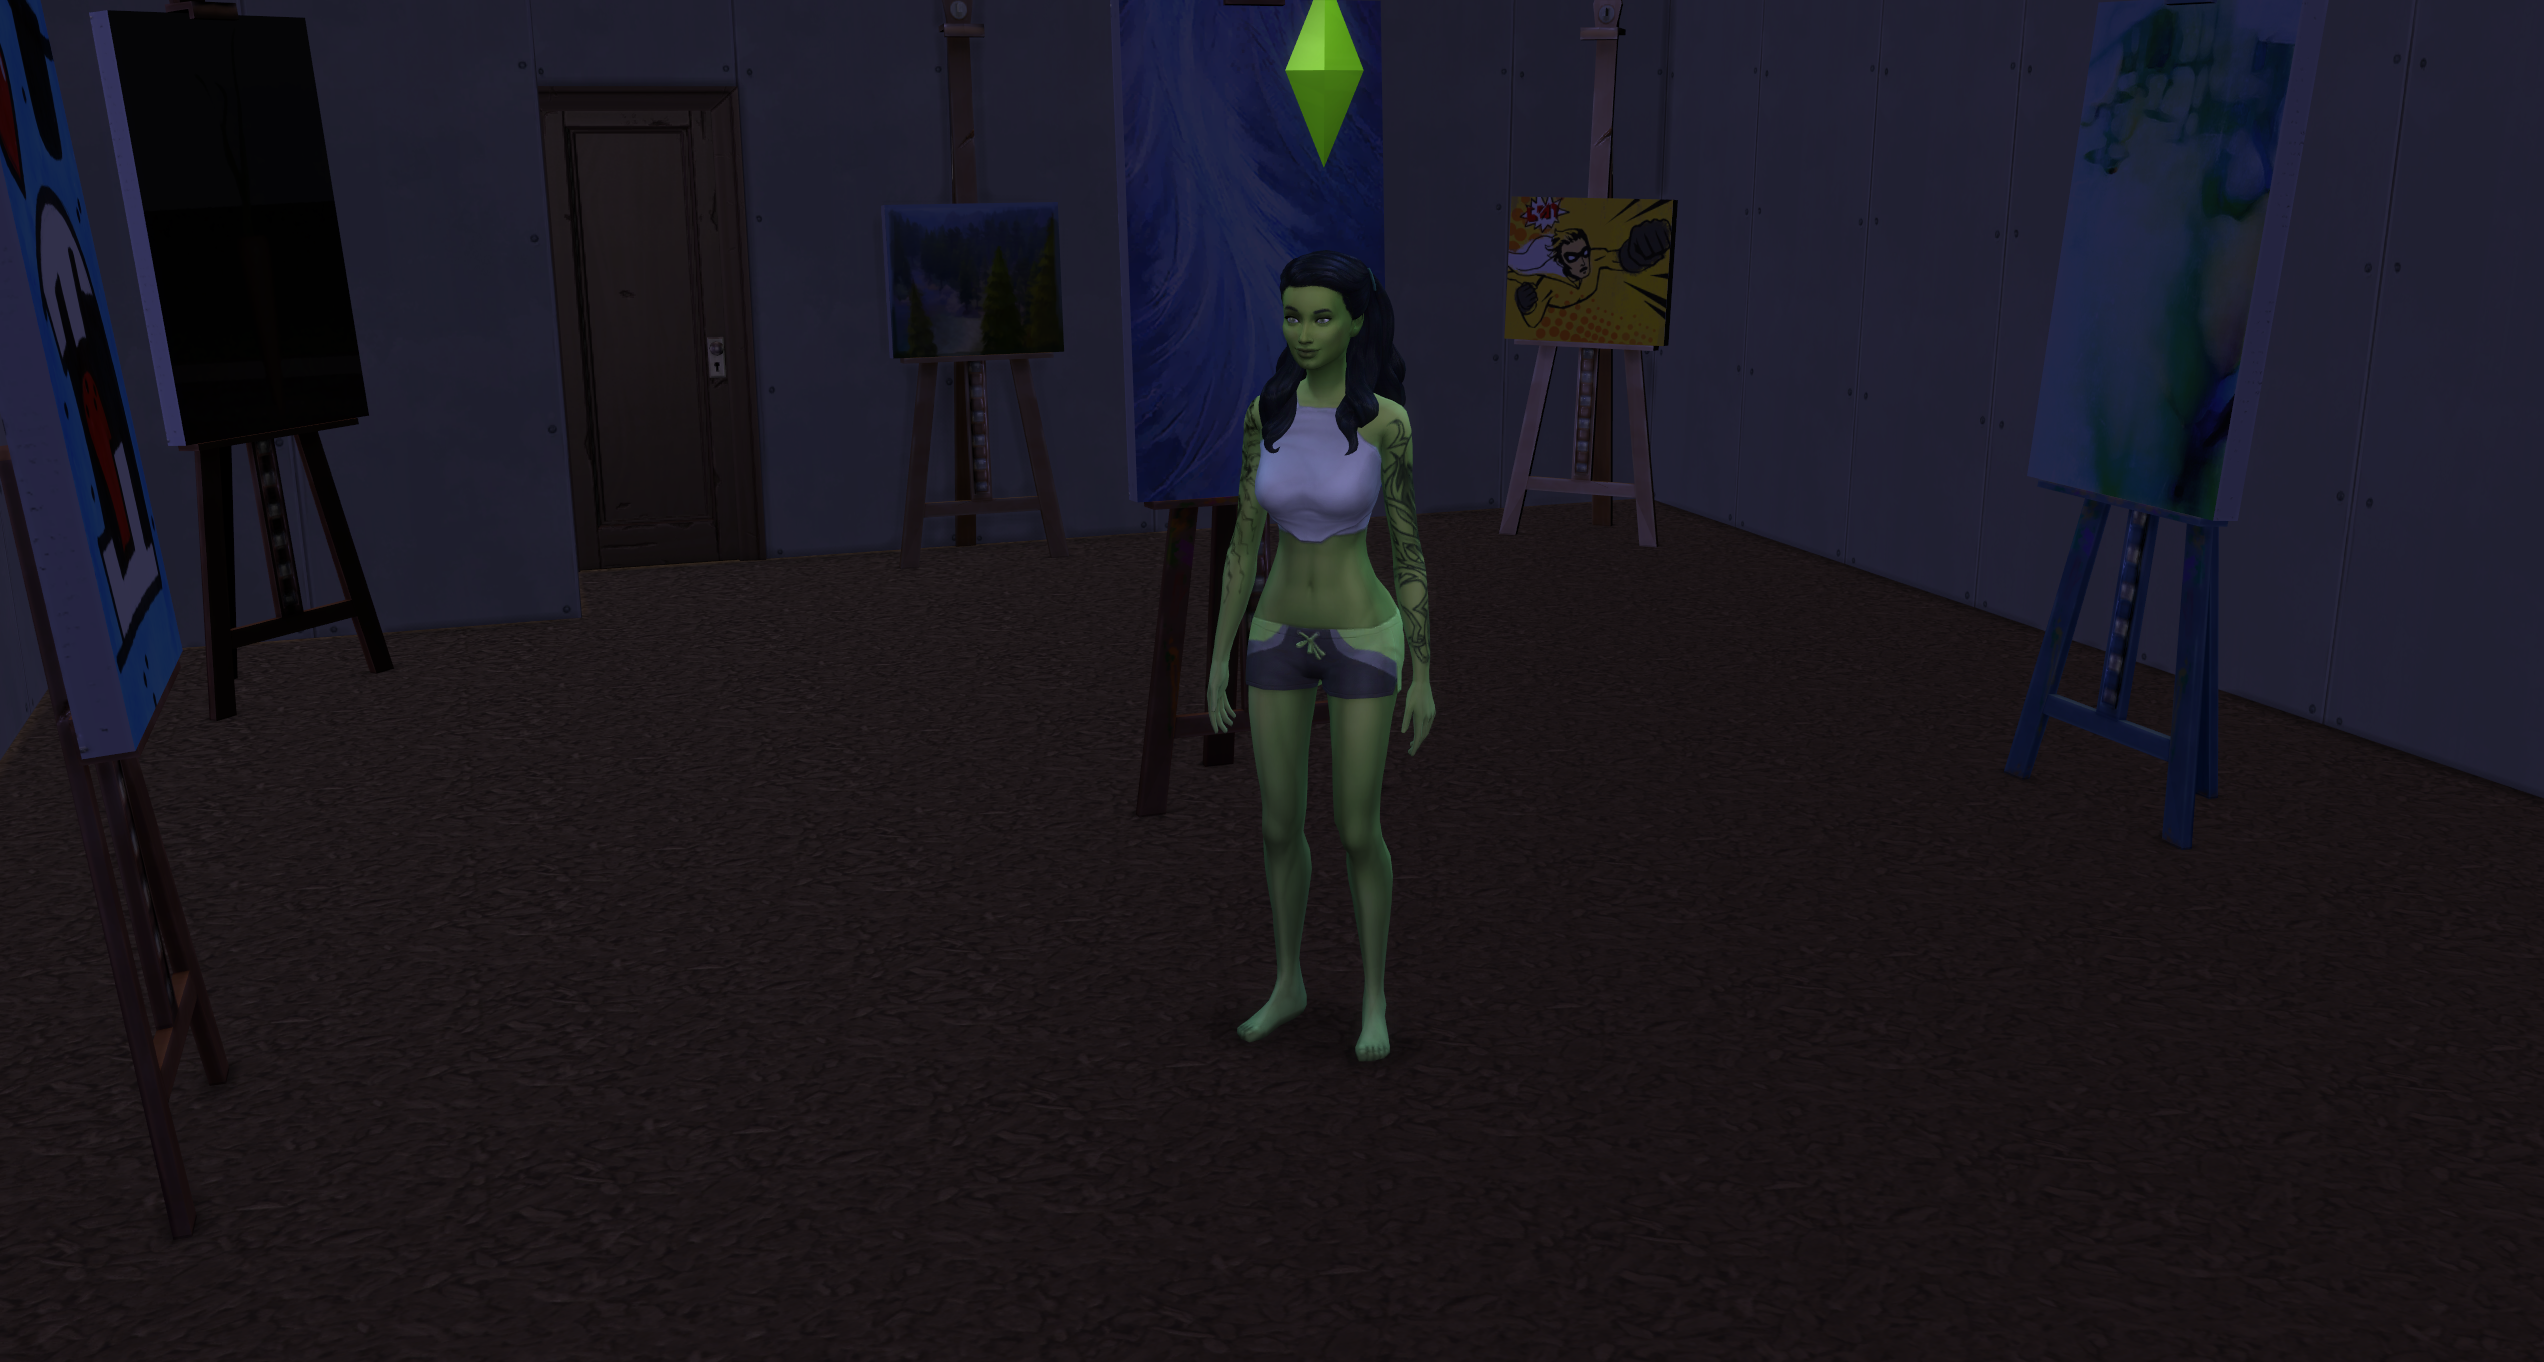 Sims Paintings Search Result At Paintingvalley Com - 2544x1362 how to make money in the sims 4 without cheat codes experience painting goblin